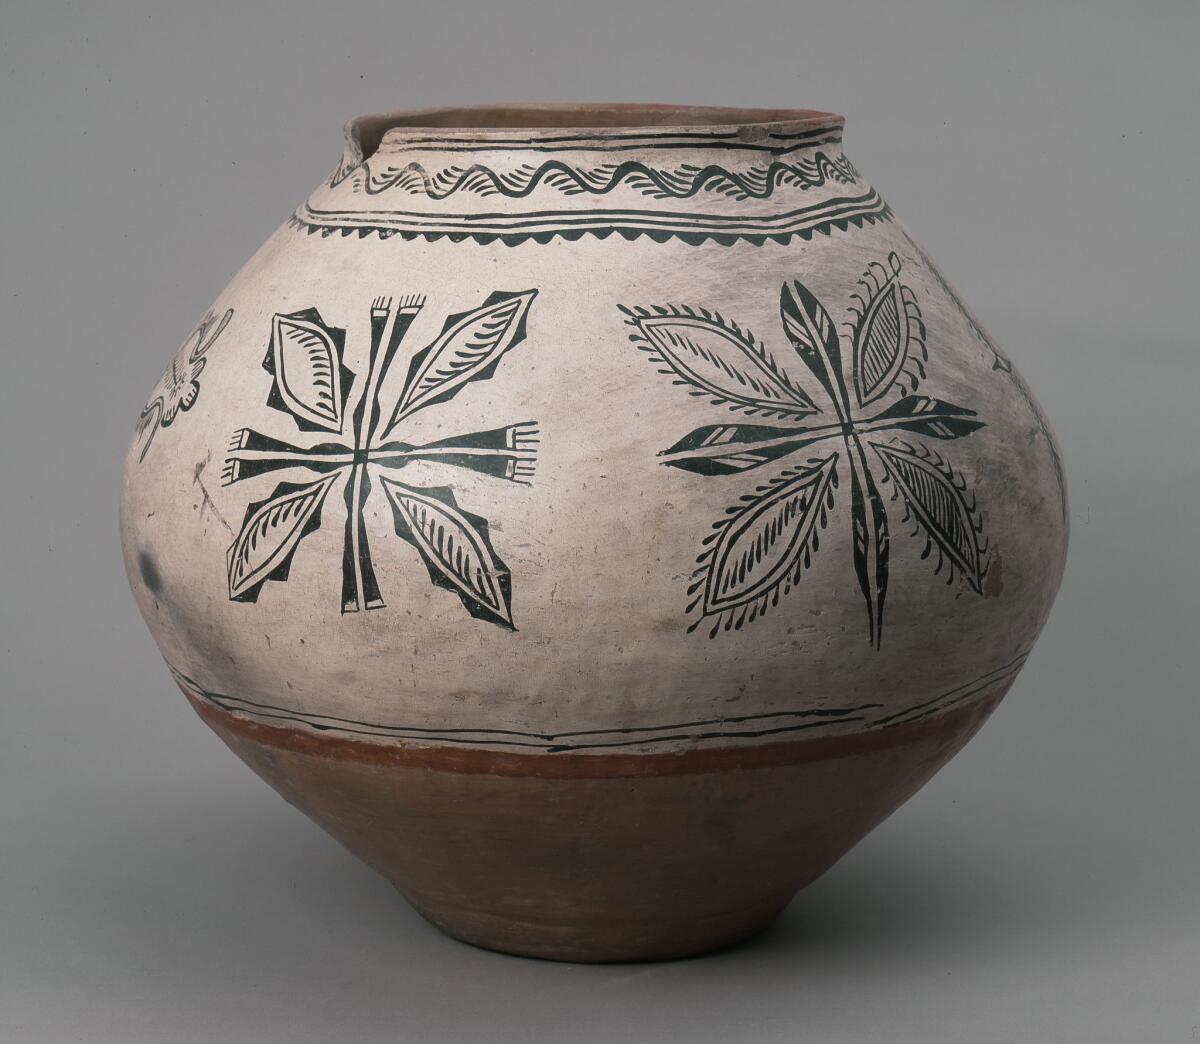 Southwest Museum pottery collection casts an eye on continuity